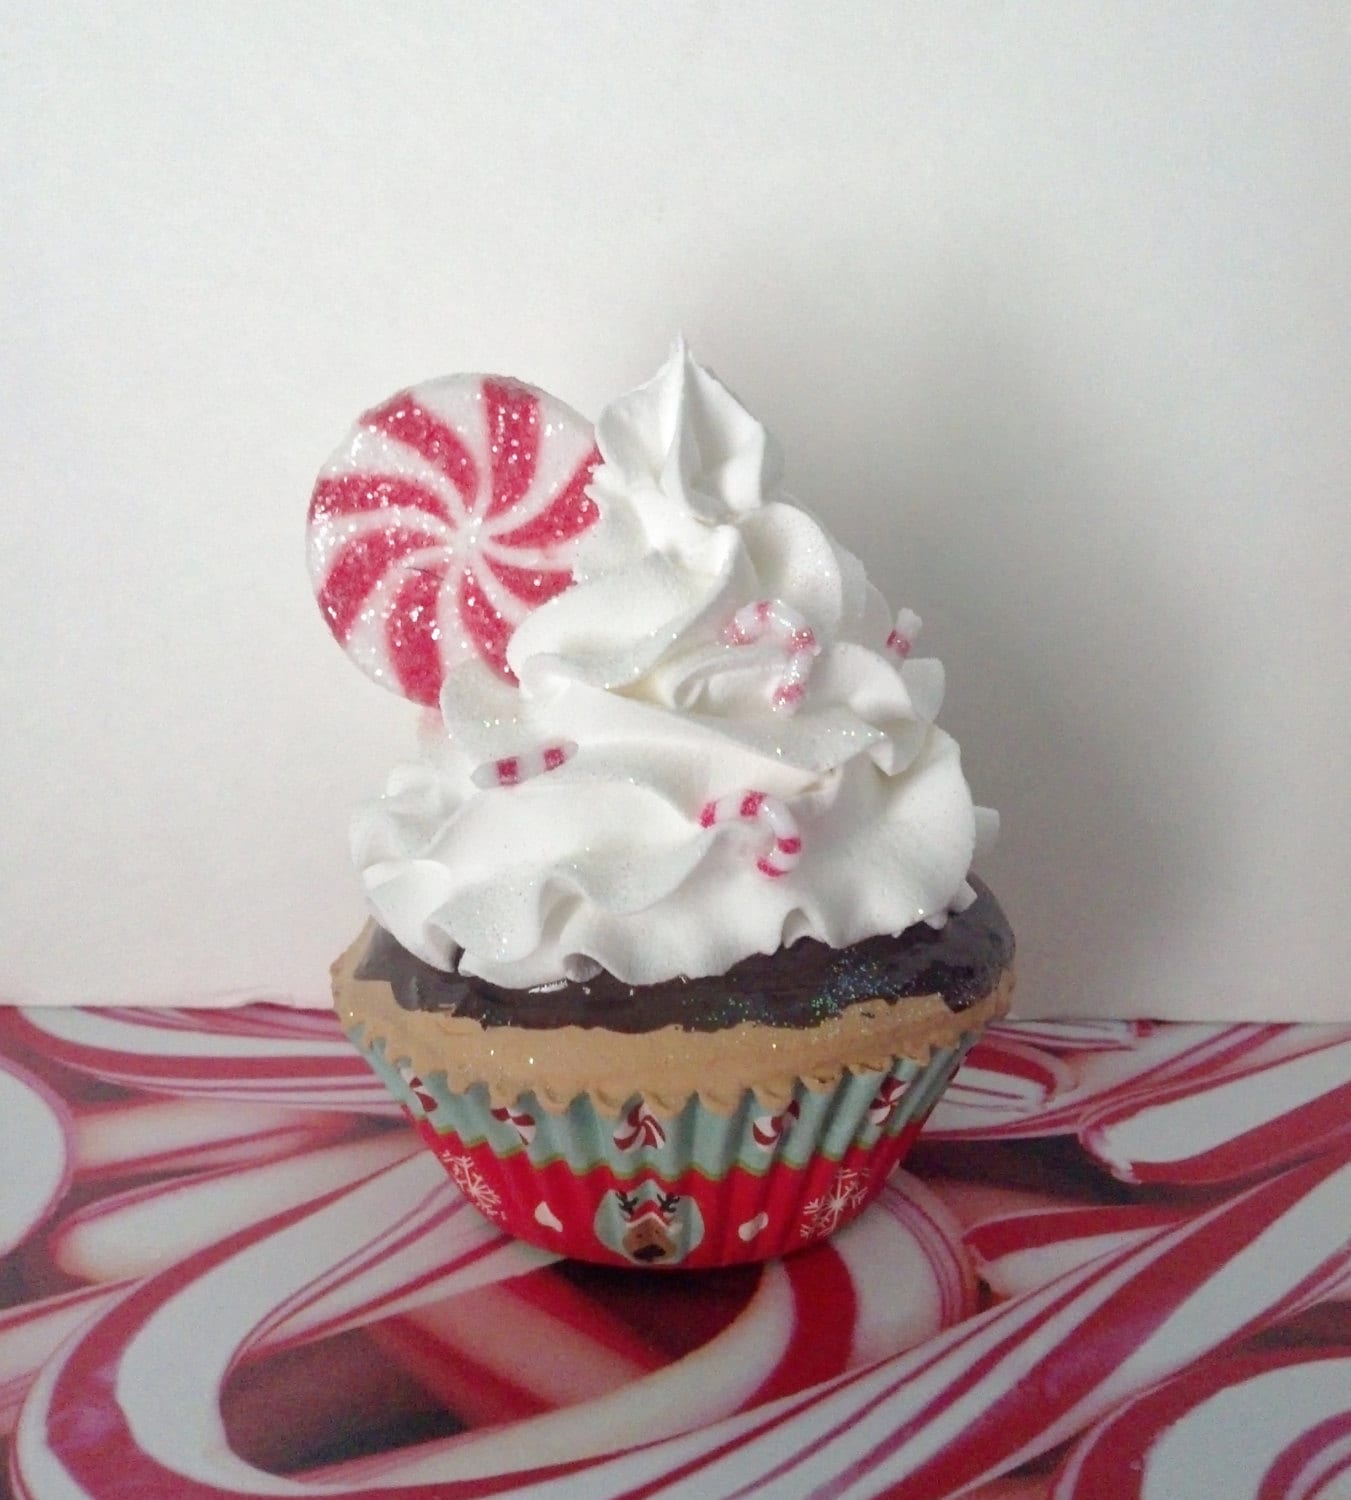 Chocolate Candy Cane Fake Cupcake, Christmas Cupcake Photo Props, Holiday Decorations, Party Displays, Secret Santa Gifts, Home Decor